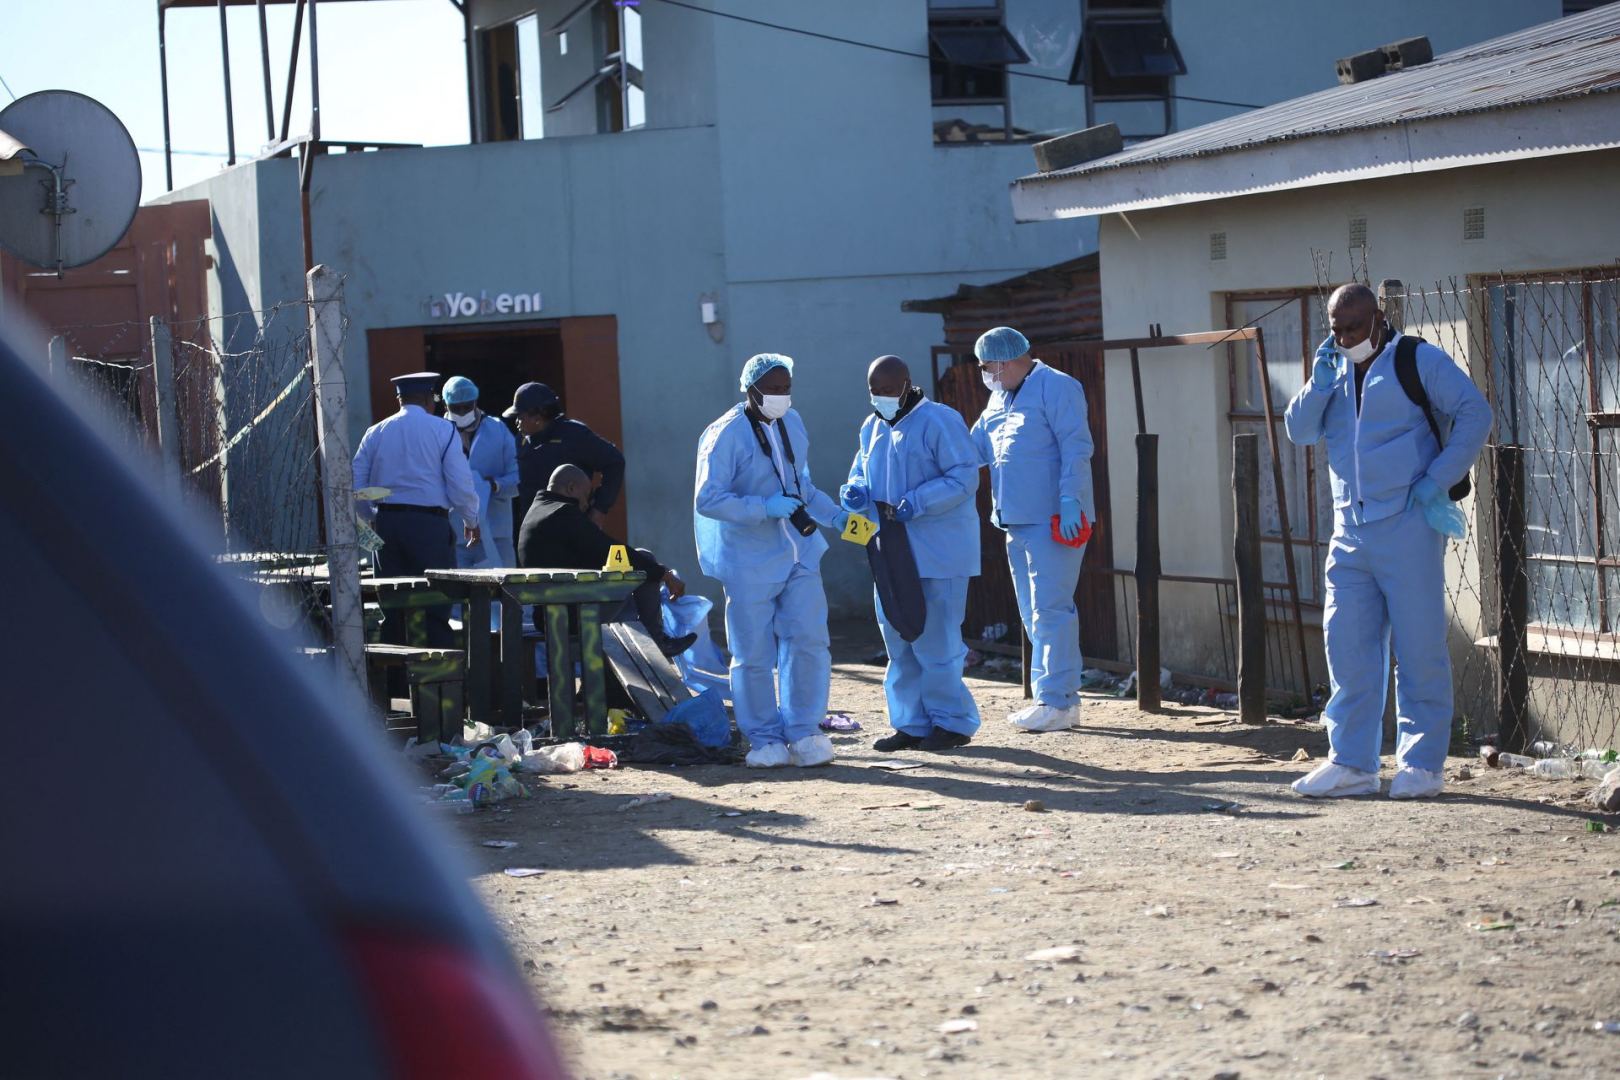 At least 21 found dead in South African tavern